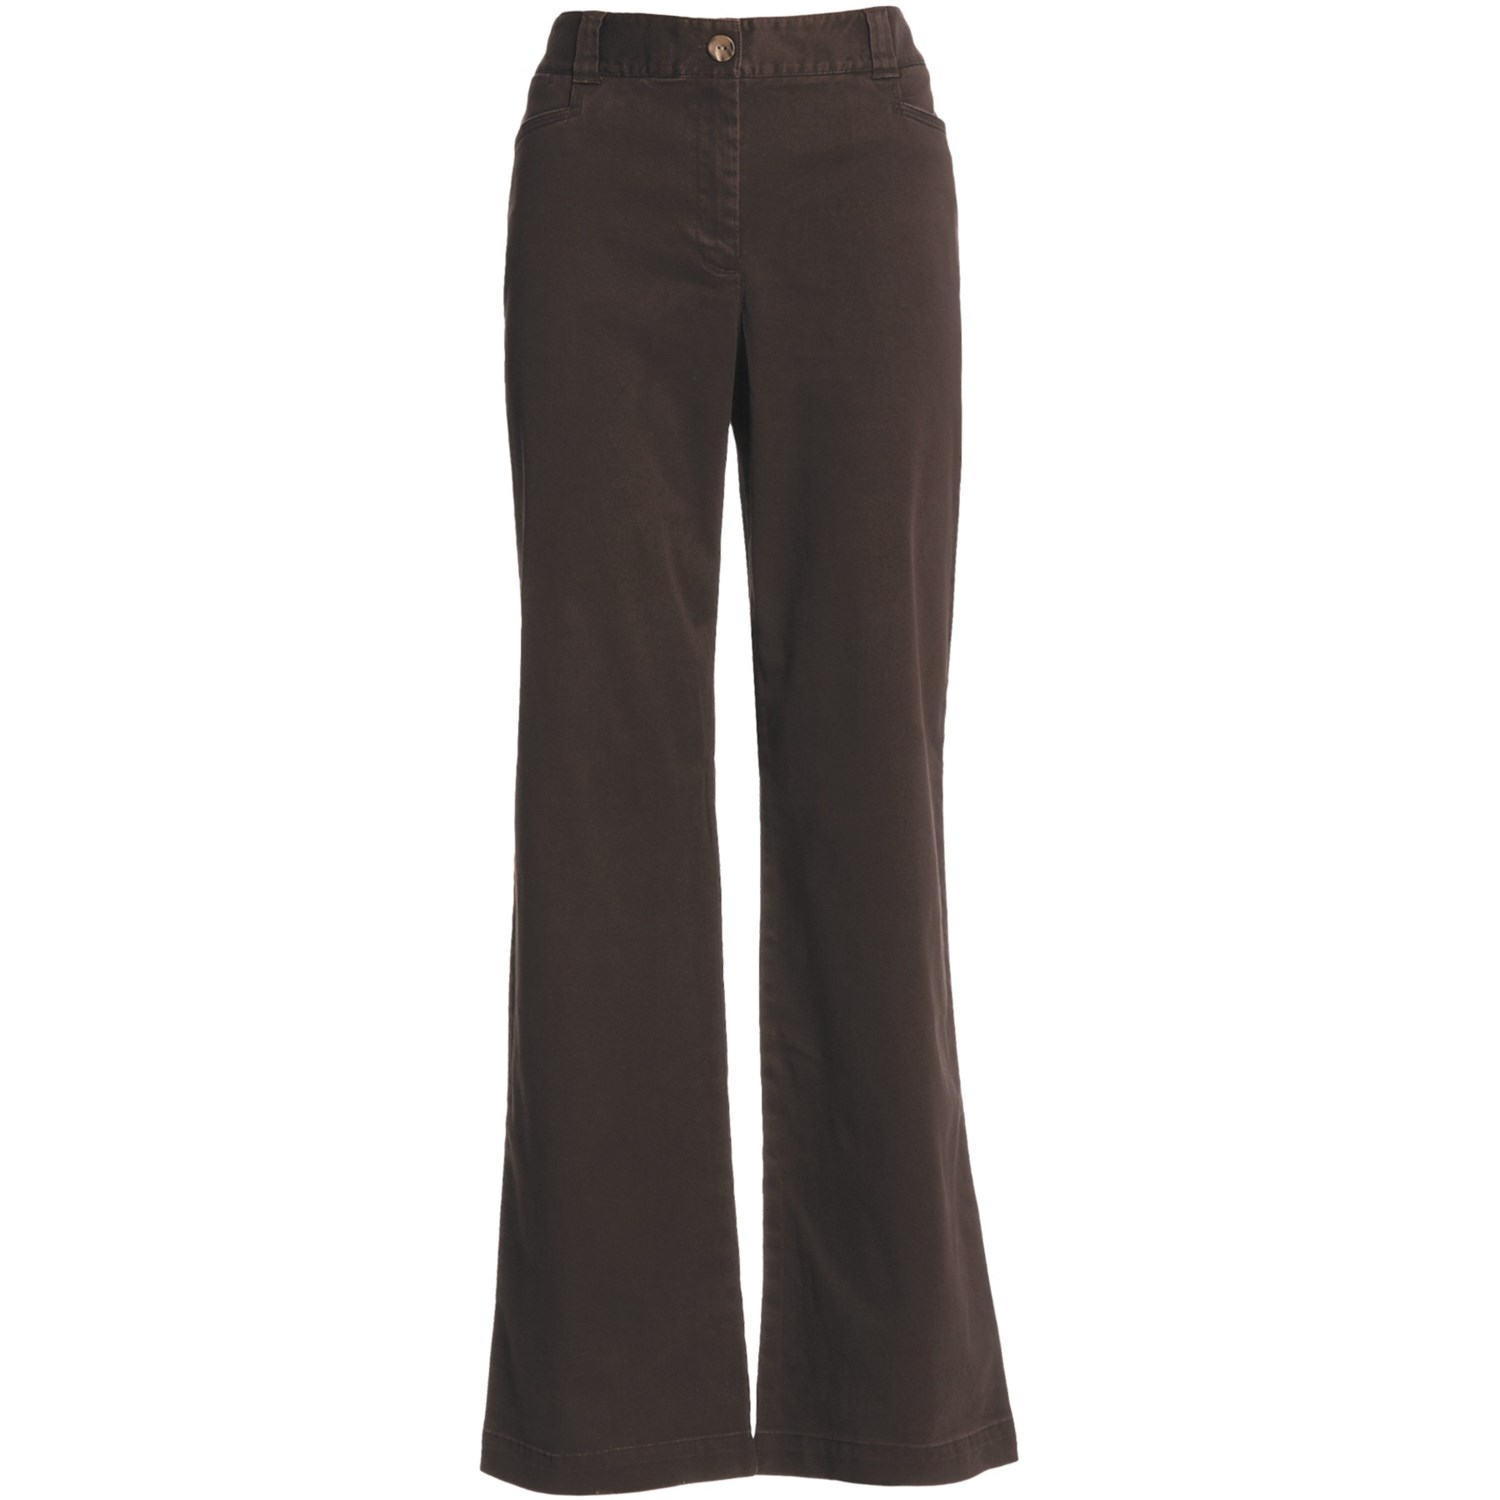 Stretch Cotton Chino Pants (For Women) 4392T - Save 71%